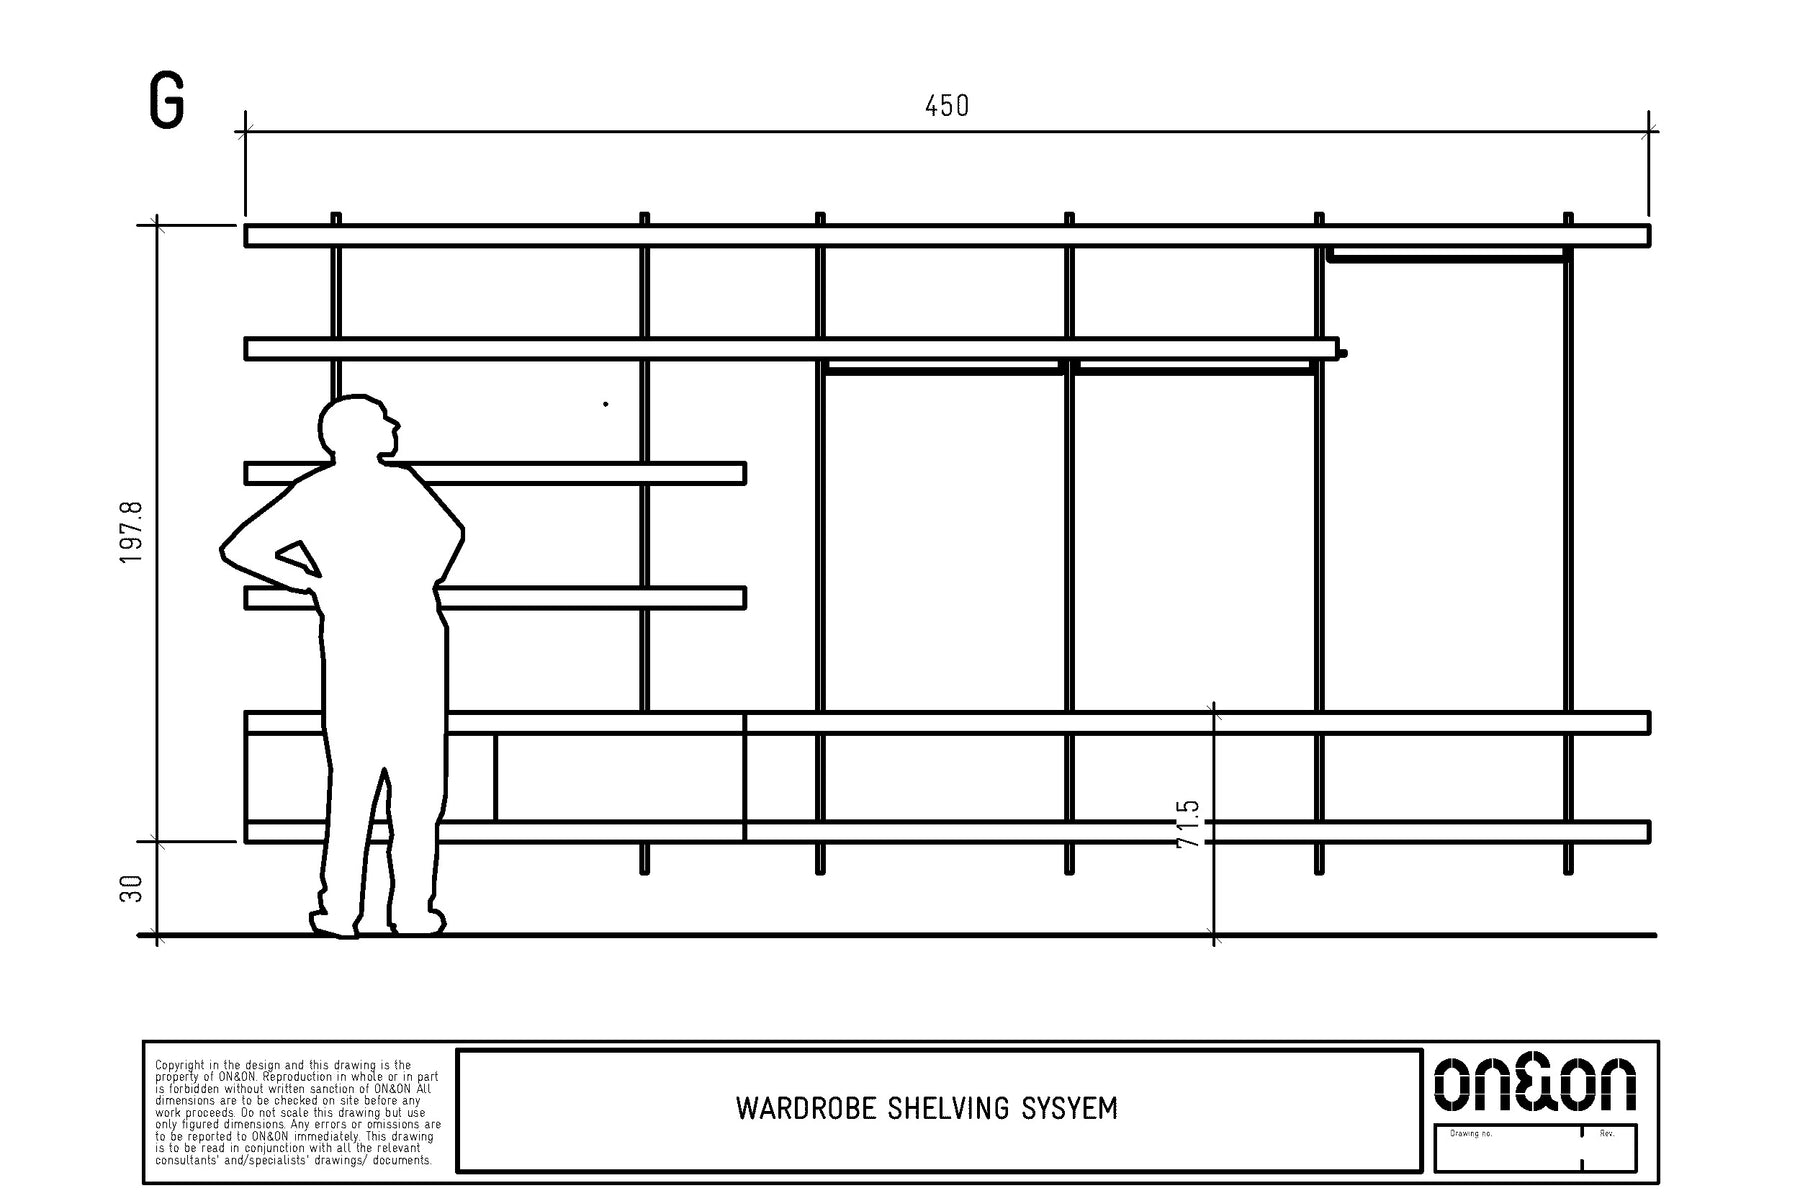 wall shelving system G for clothes drawing